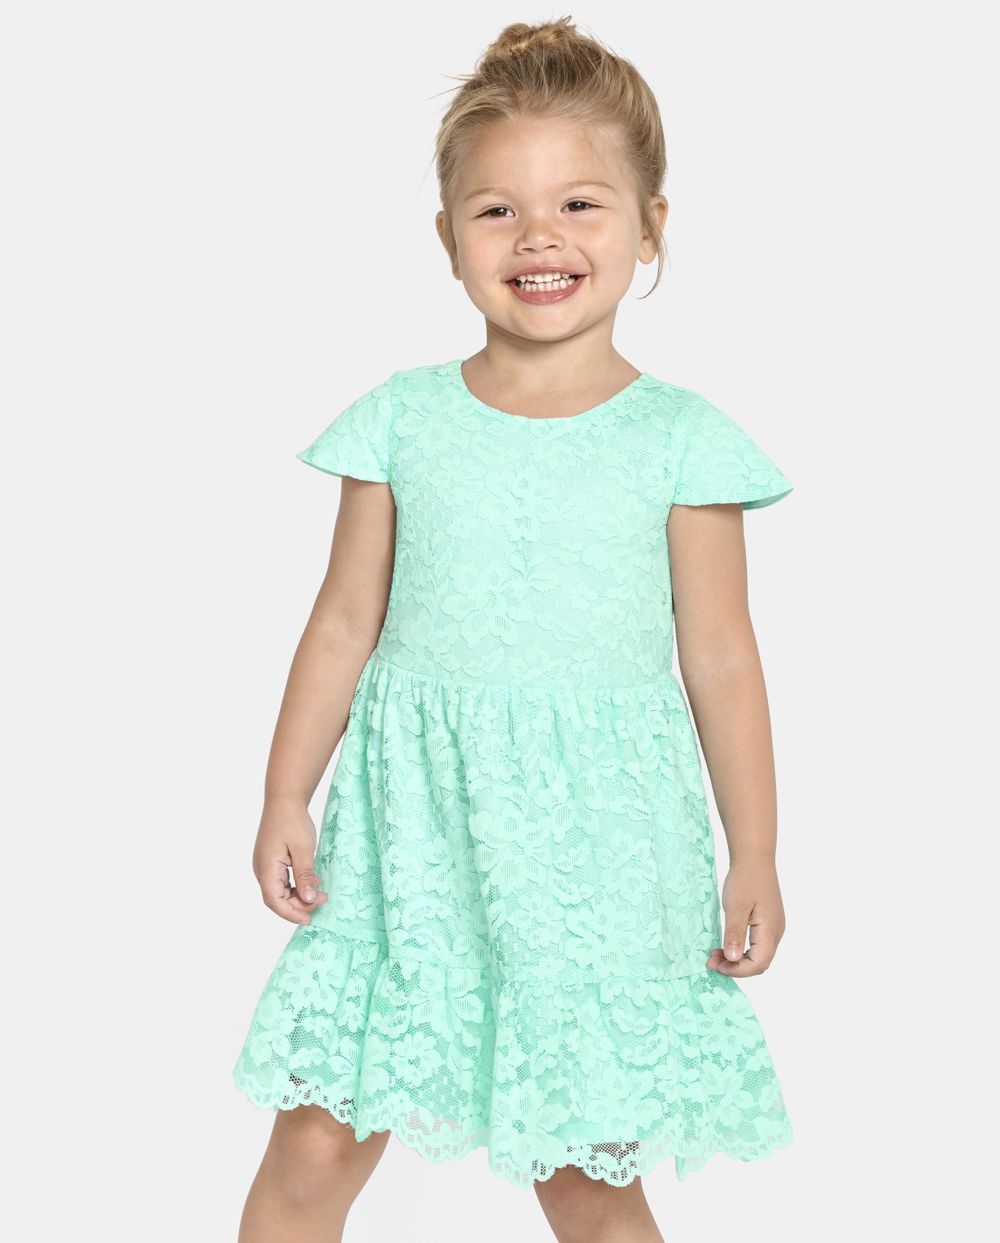 Toddler Cap Short Sleeves Sleeves Crew Neck Above the Knee V Back Dress With Ruffles